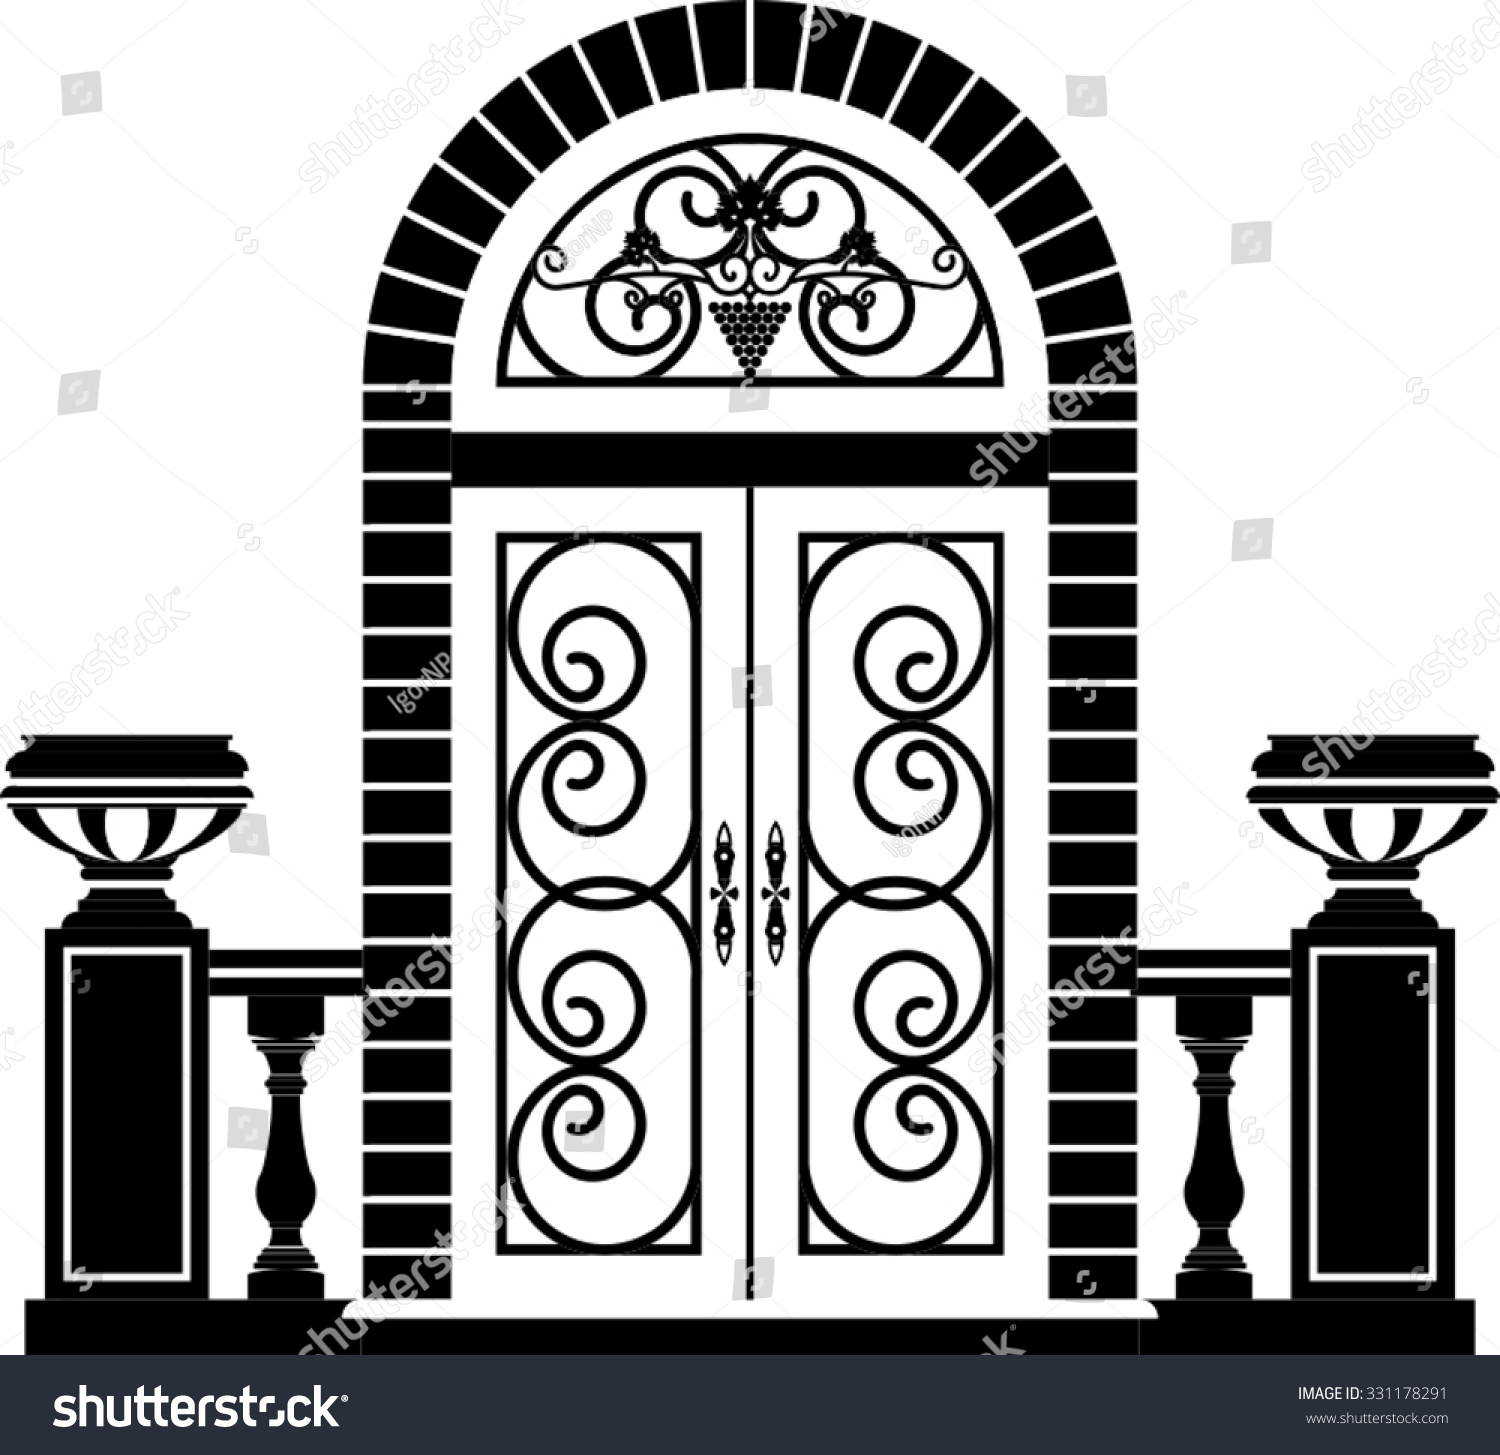 door clipart black and white - photo #38